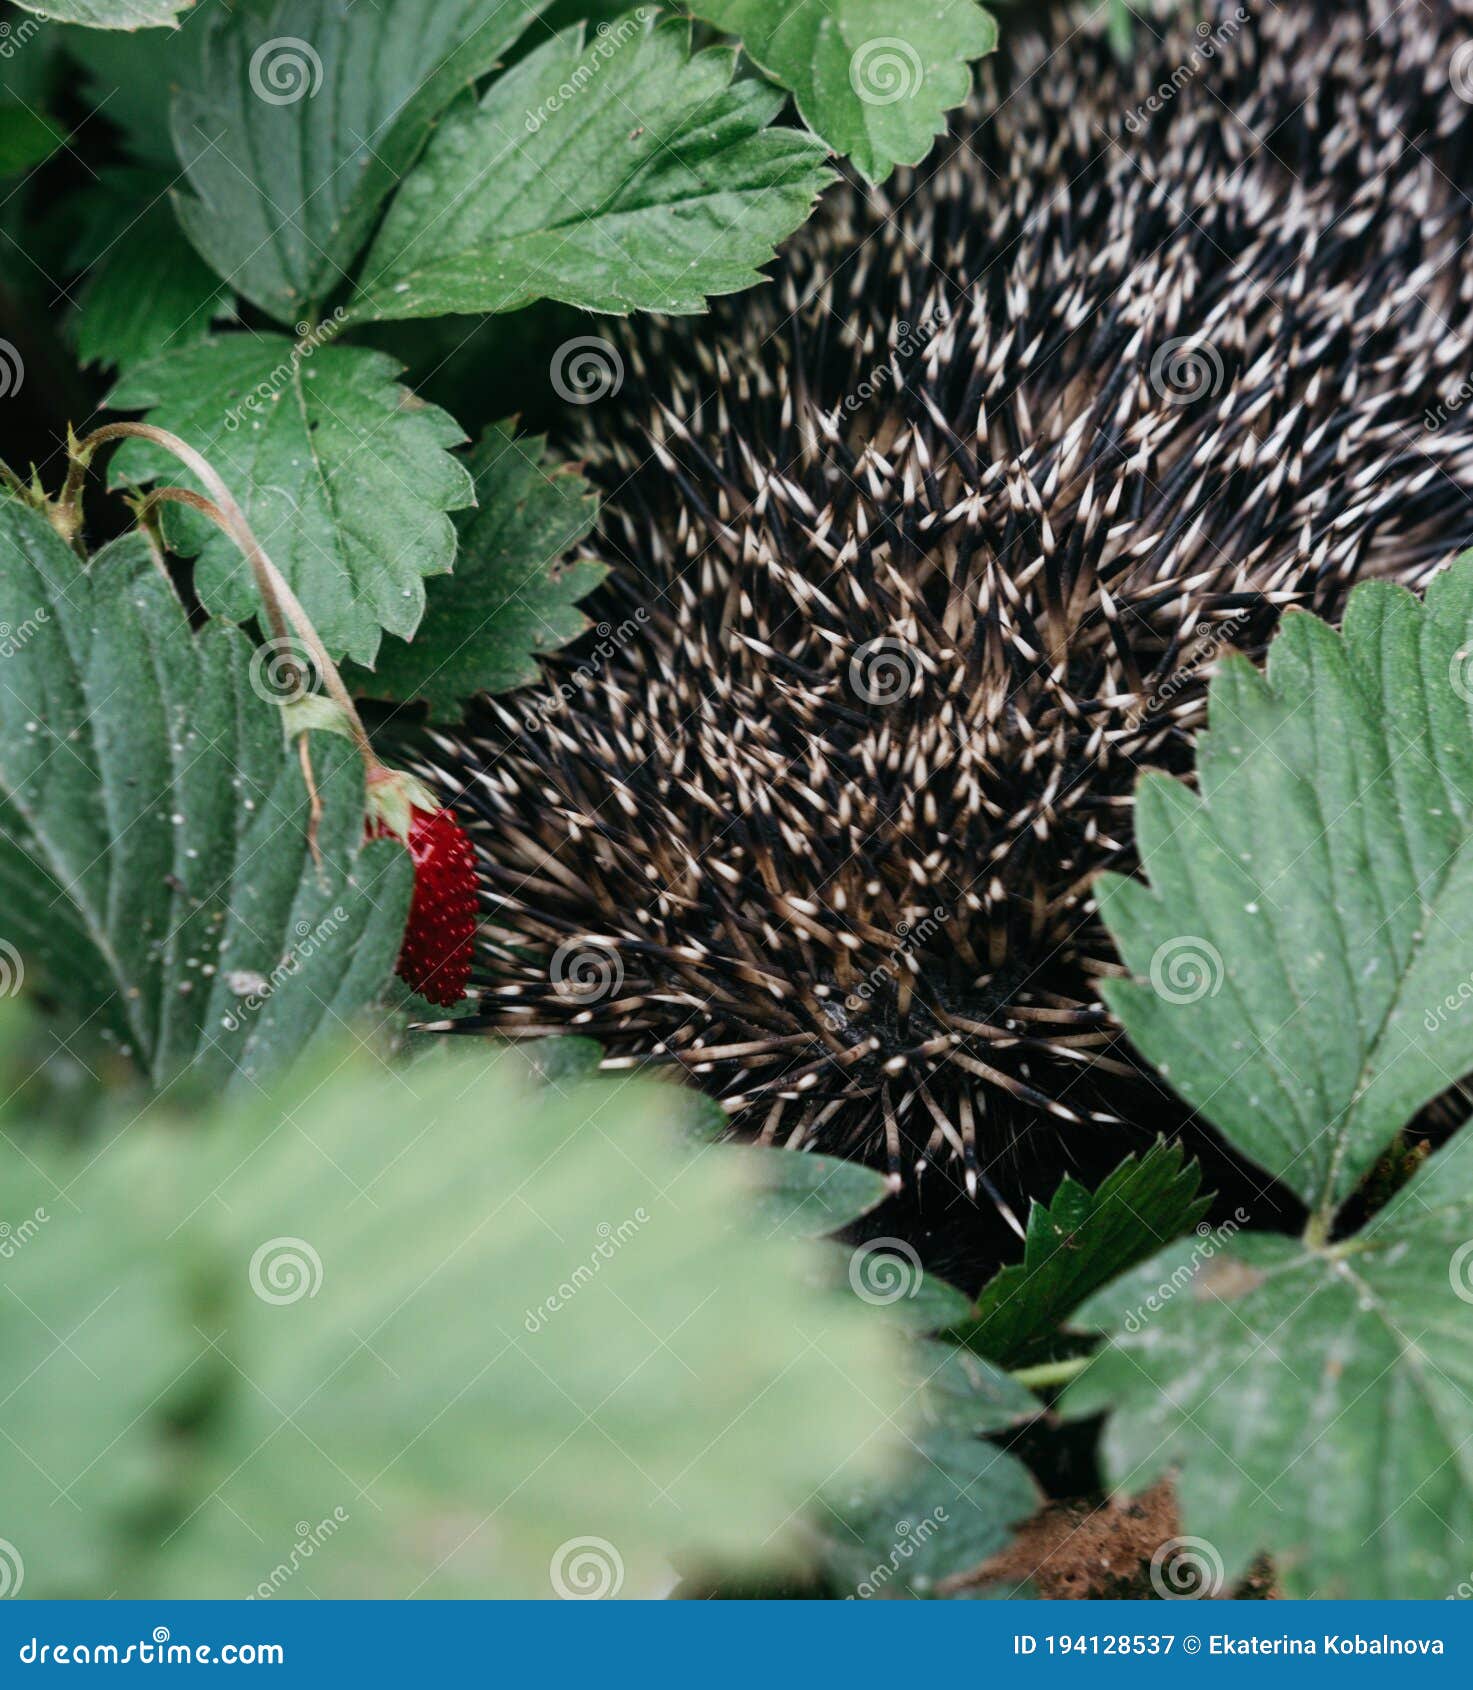 Nocturnal Forest Dweller, a Small Predatory Vertebrate Rare Mammalian Animal  with Sharp Spines on Its Back. a Small Prickly Stock Image - Image of  blurred, animals: 194128537